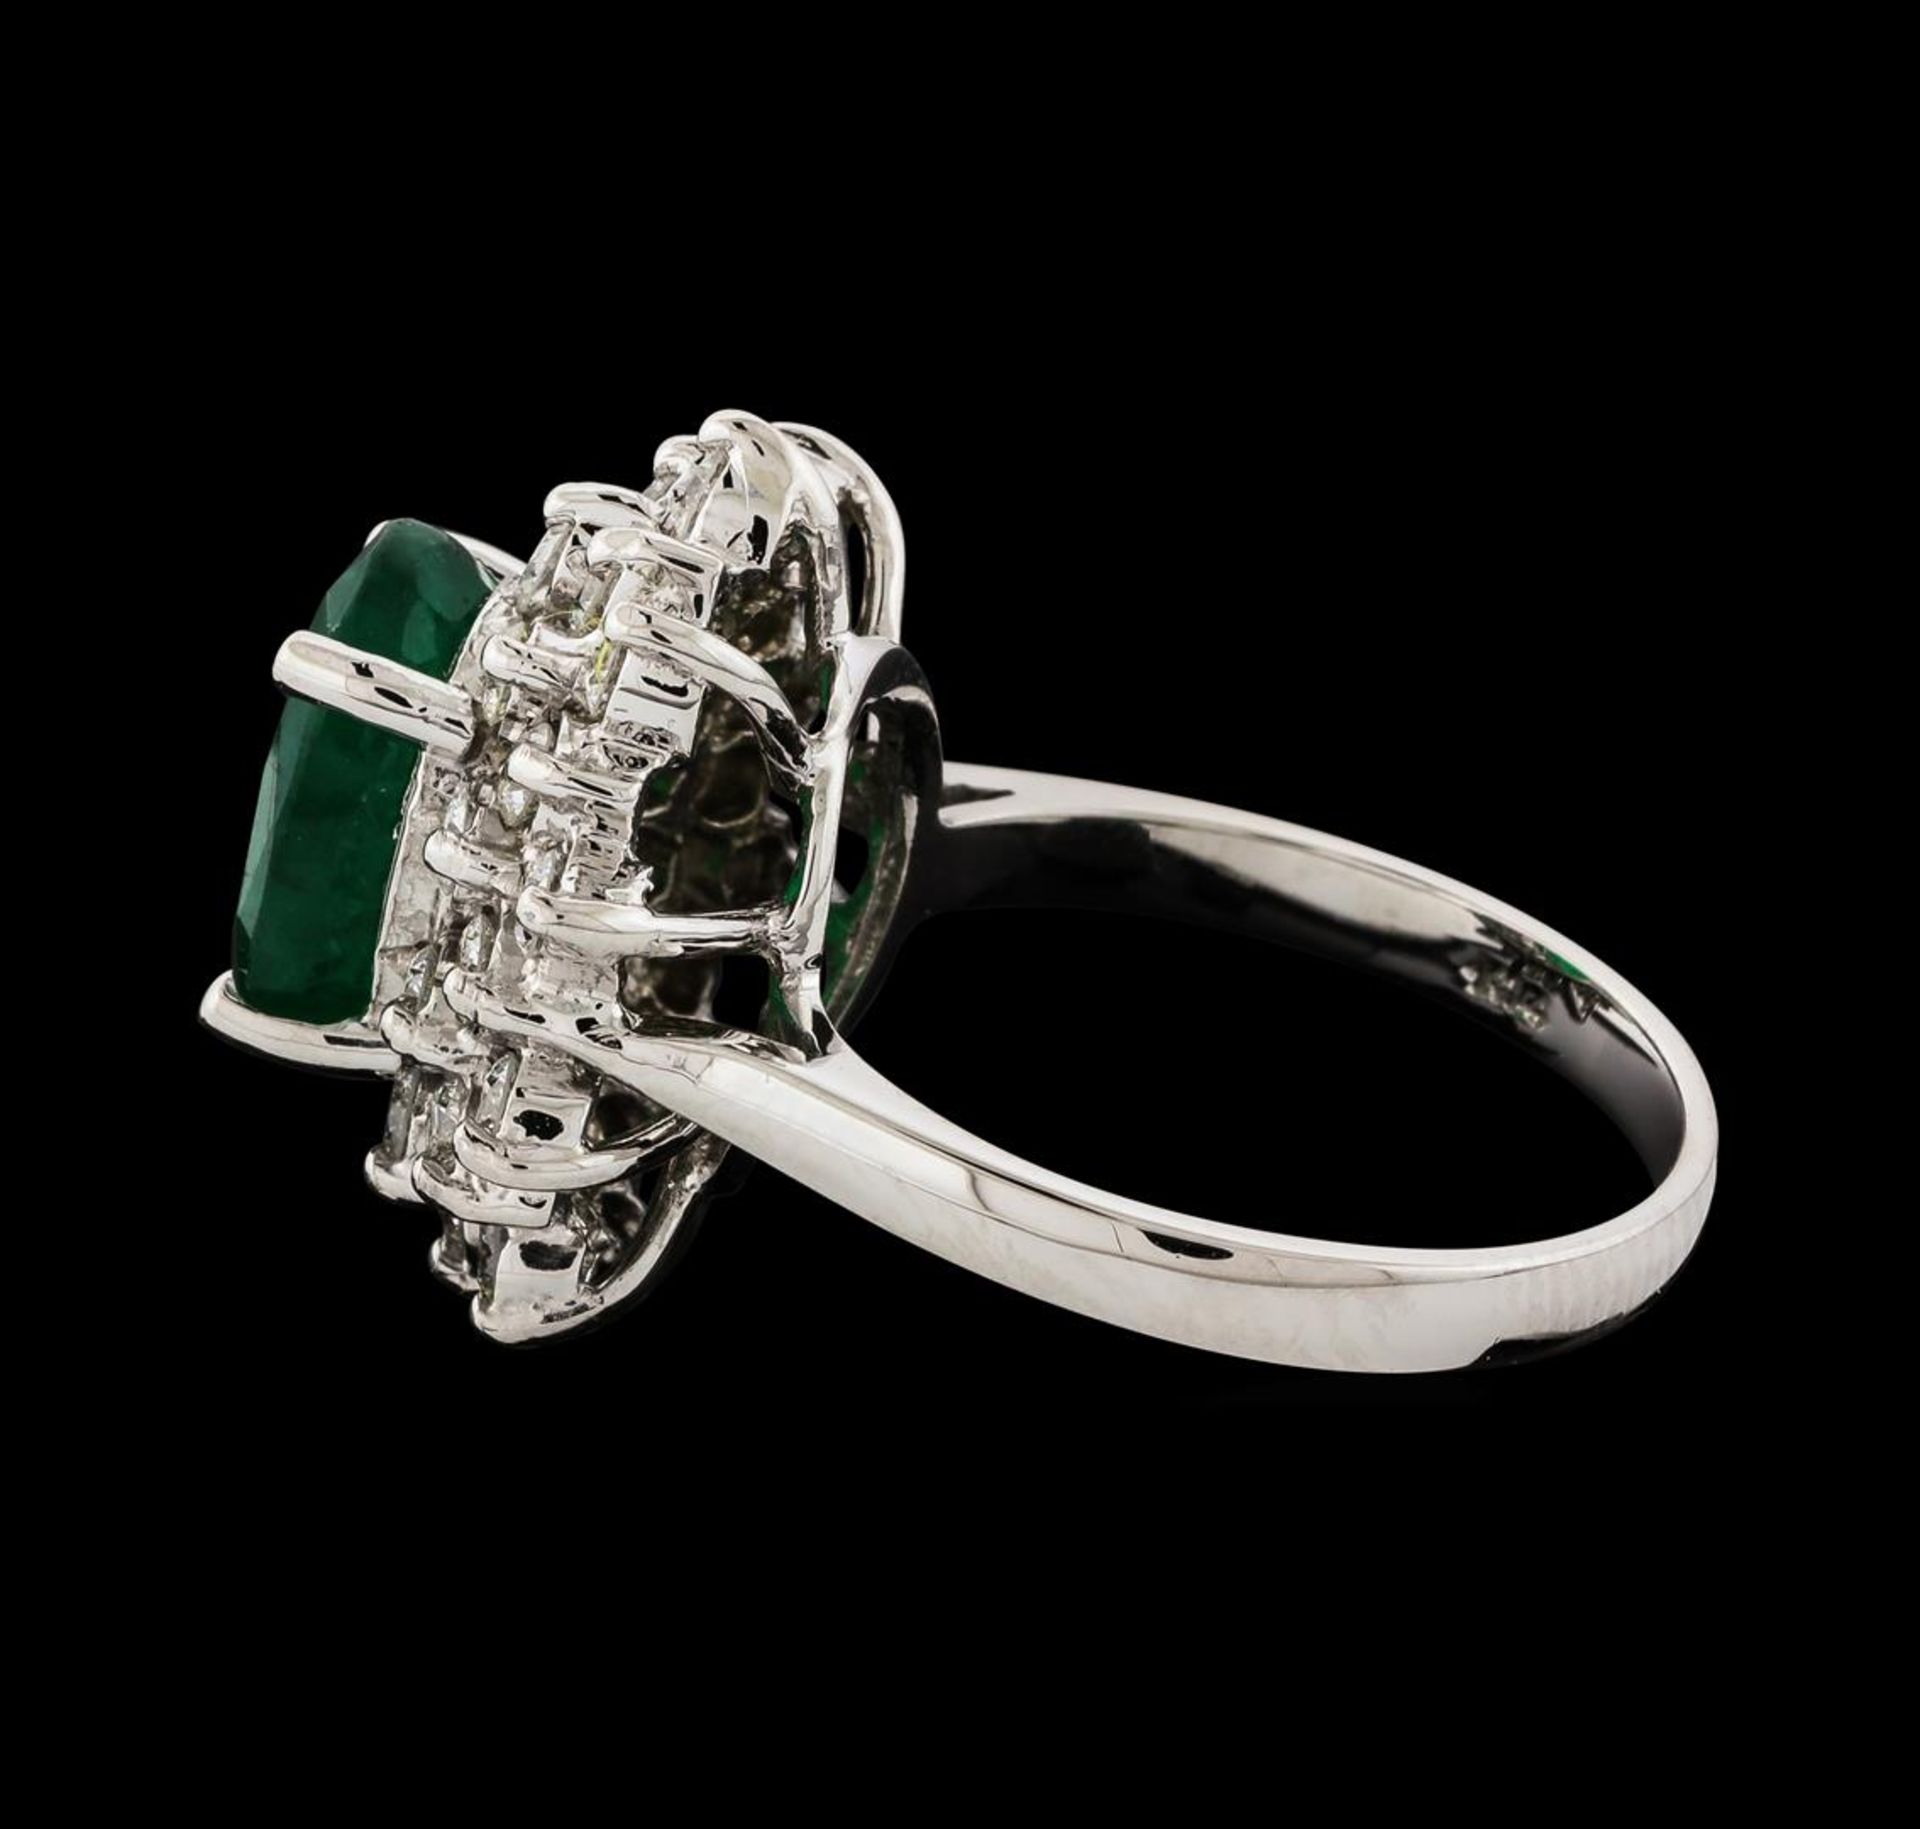 3.30 ctw Emerald and Diamond Ring - 14KT White Gold - Image 3 of 5